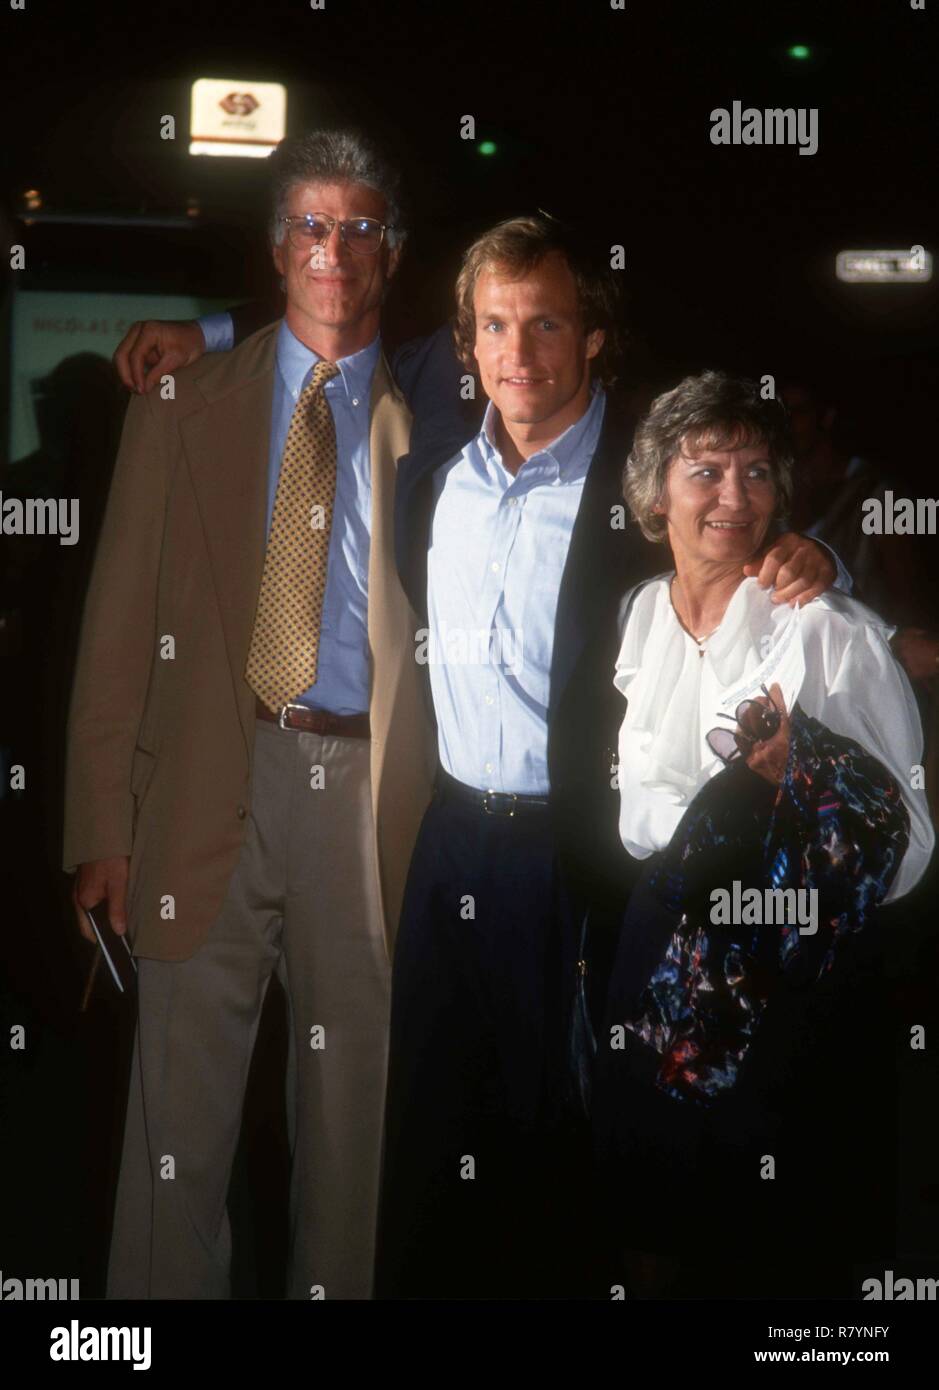 BEVERLY HILLS, CA - APRIL 6: Actor Ted Danson and actor Woody Harrelson attend the 'Indecent Proposal' Premiere on April 6, 1993 at the Samuel Goldwyn Theatre in Beverly Hills, California. Photo by Barry King/Alamy Stock Photo Stock Photo